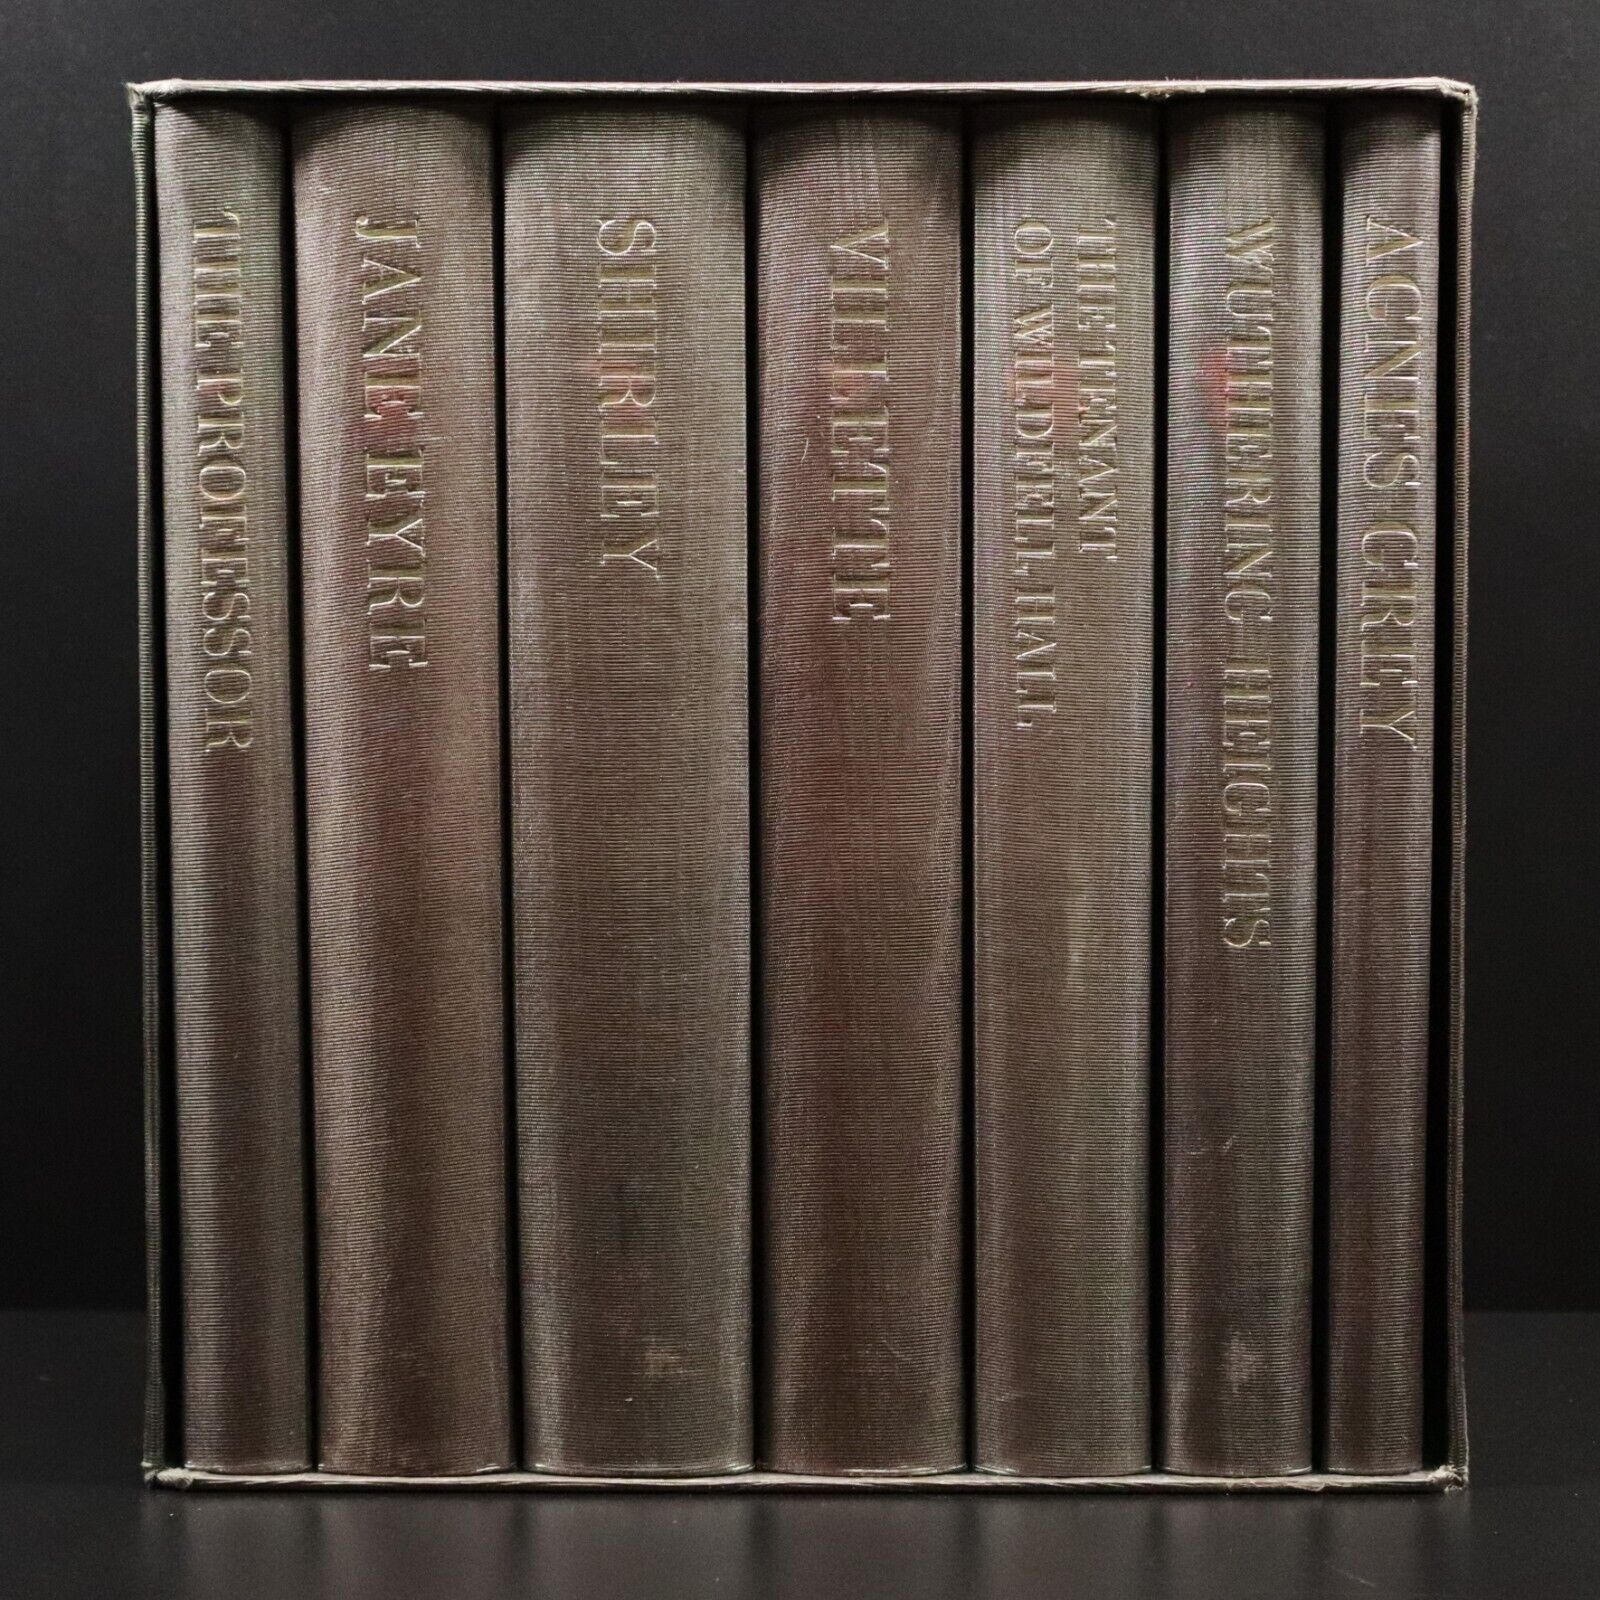 1993 7vol The Bronte Sisters Complete Novels Folio Society Fiction Book Set